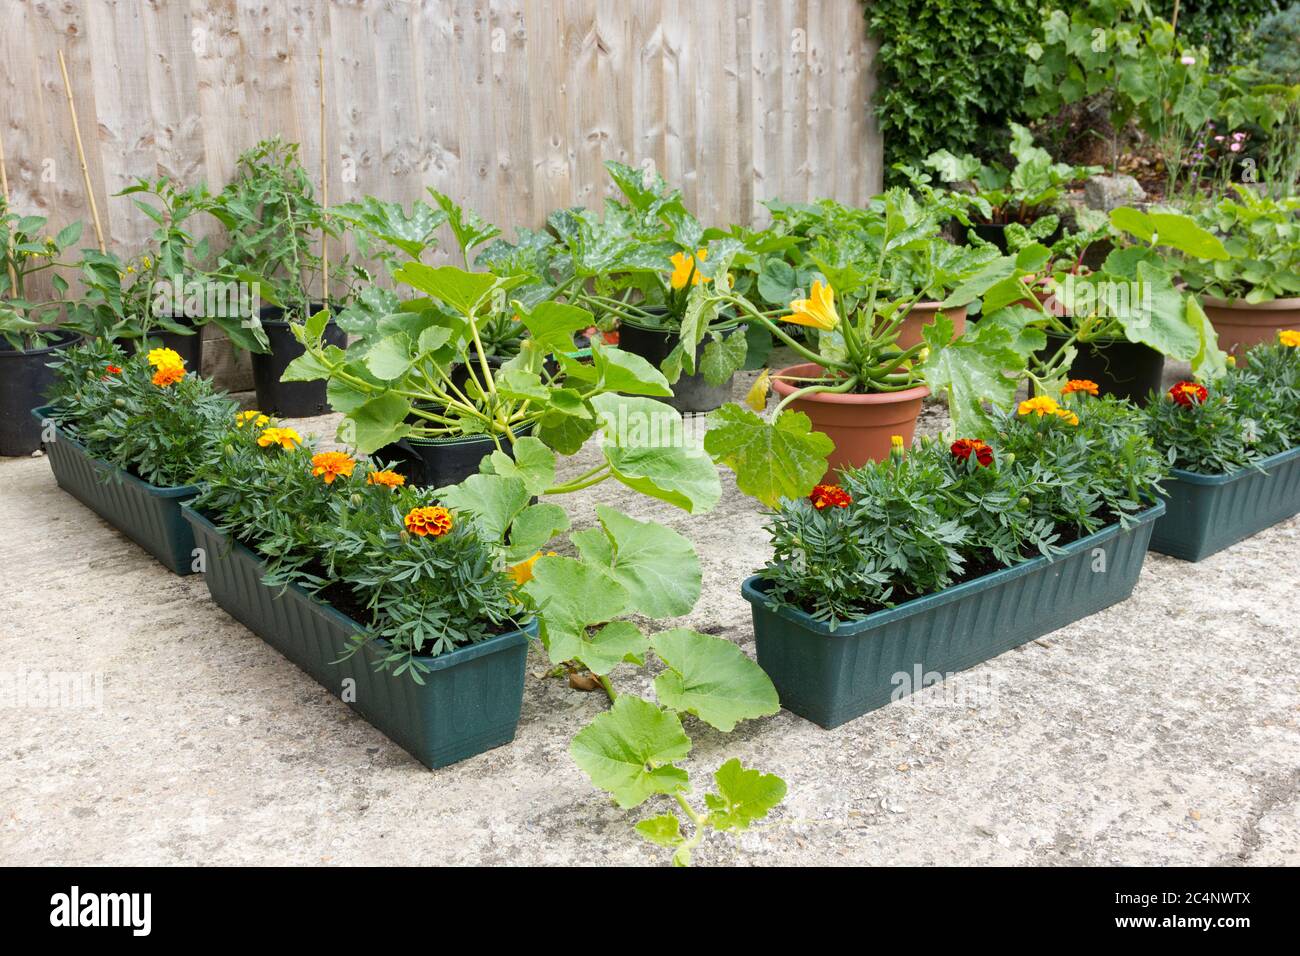 Organic Vegetable Gardening in pots and containers Stock Photo